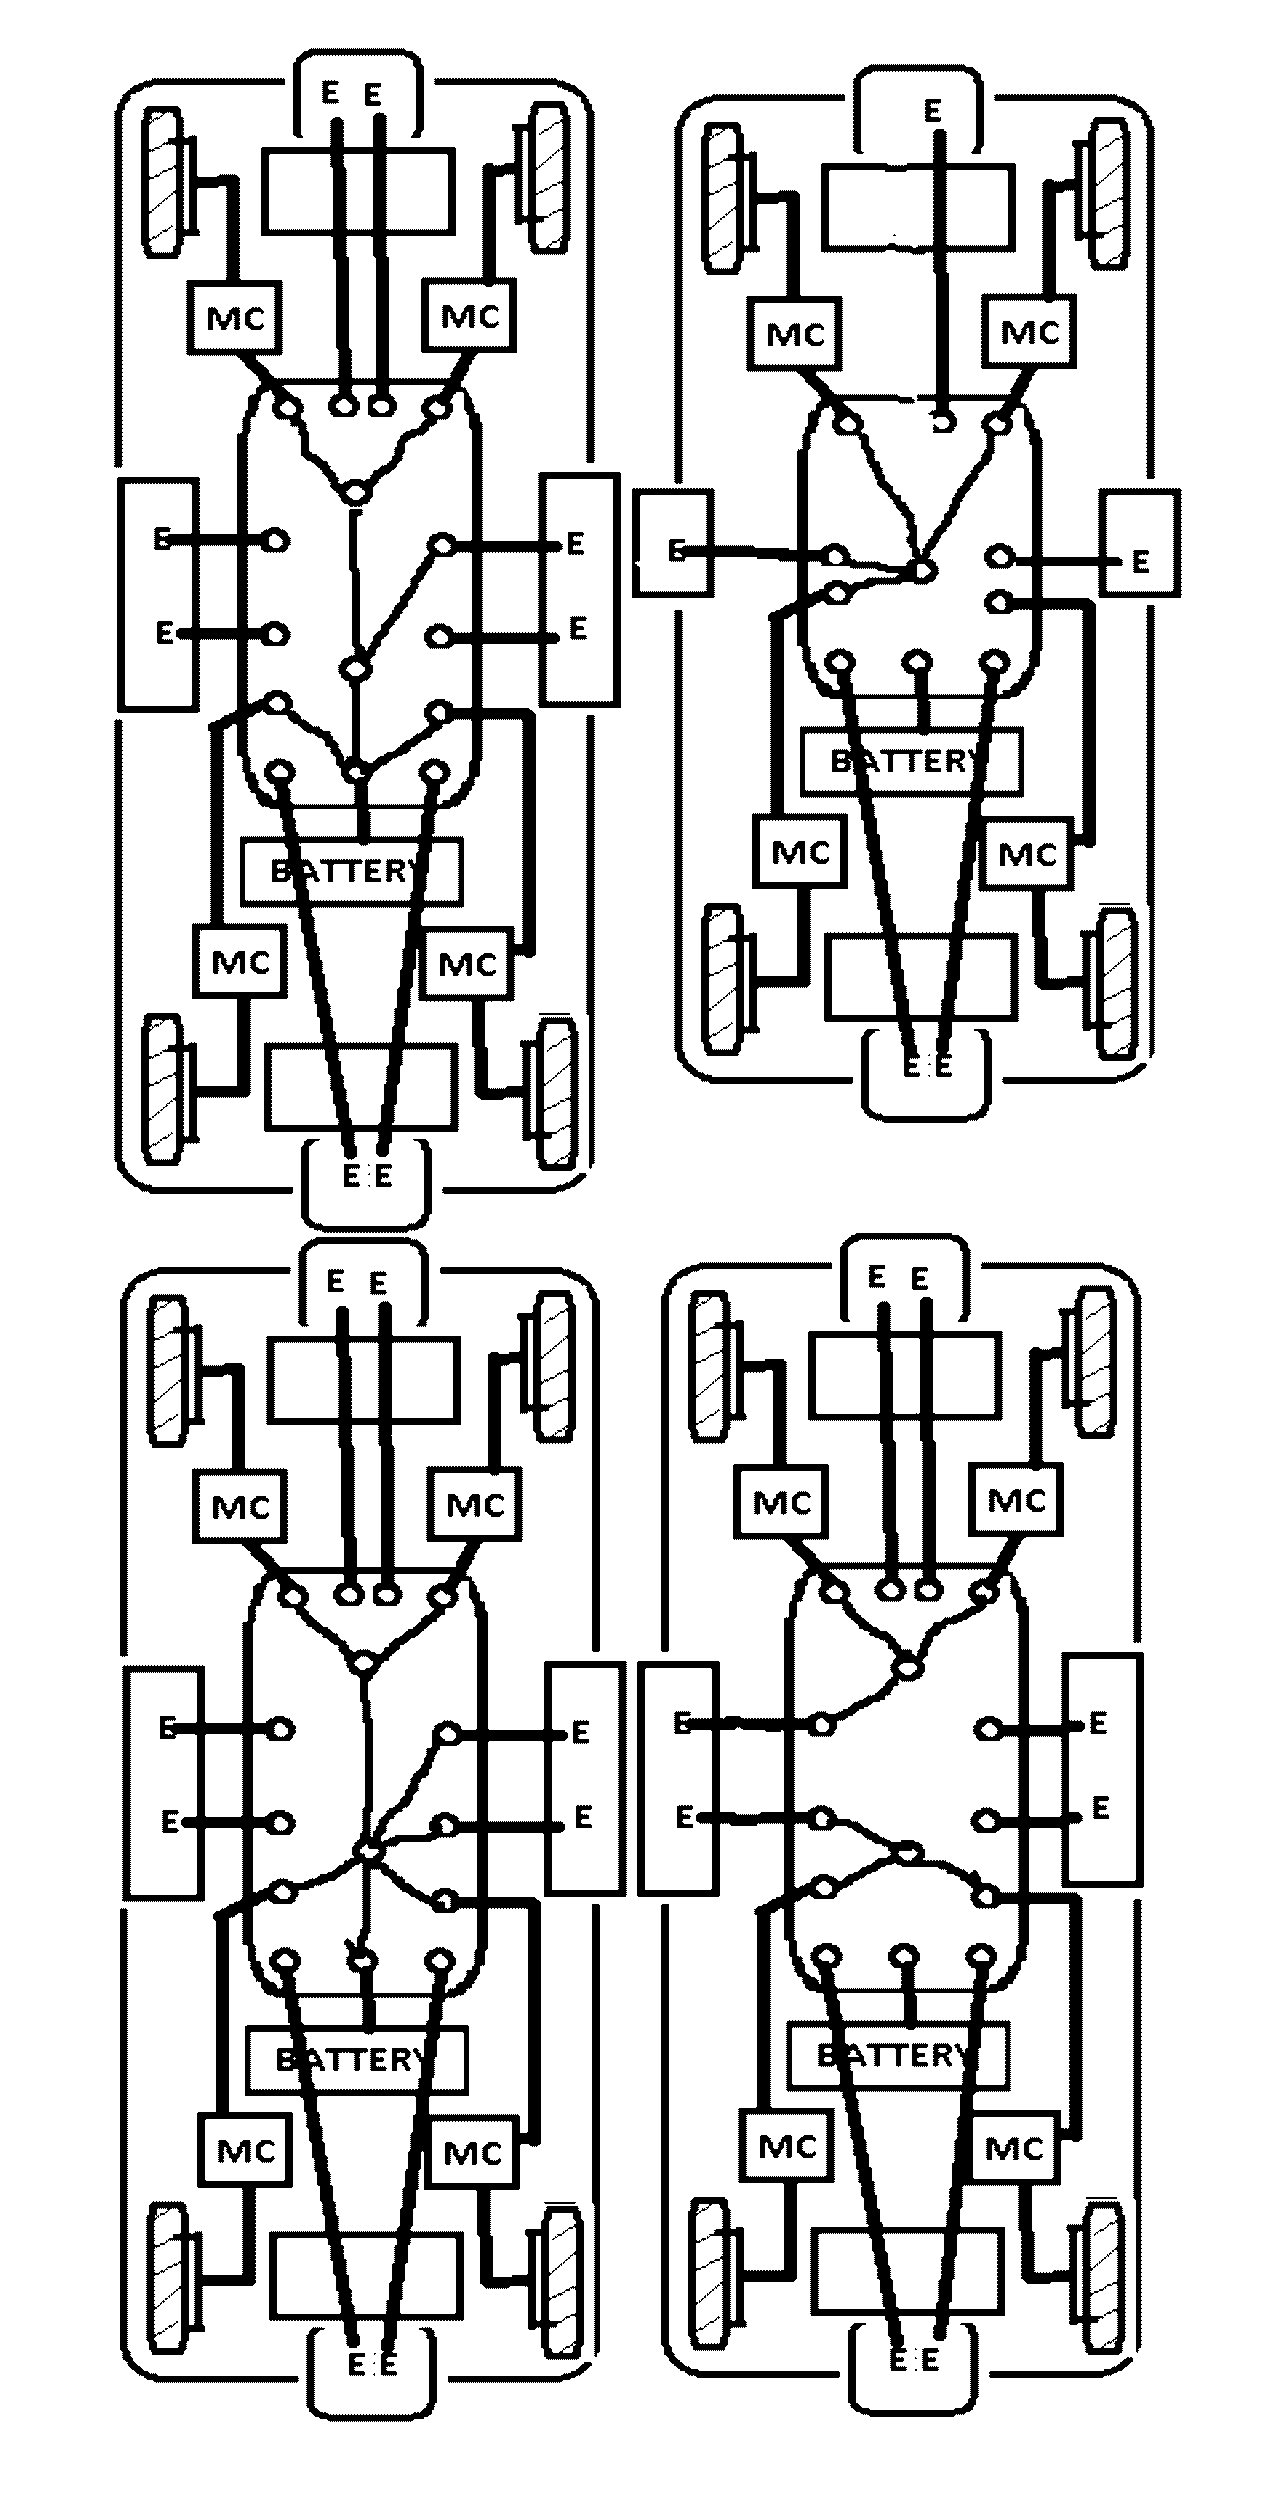 Transportation system of combined vehicles multi-coupled at highway speeds for electrical energy transfer and sharing